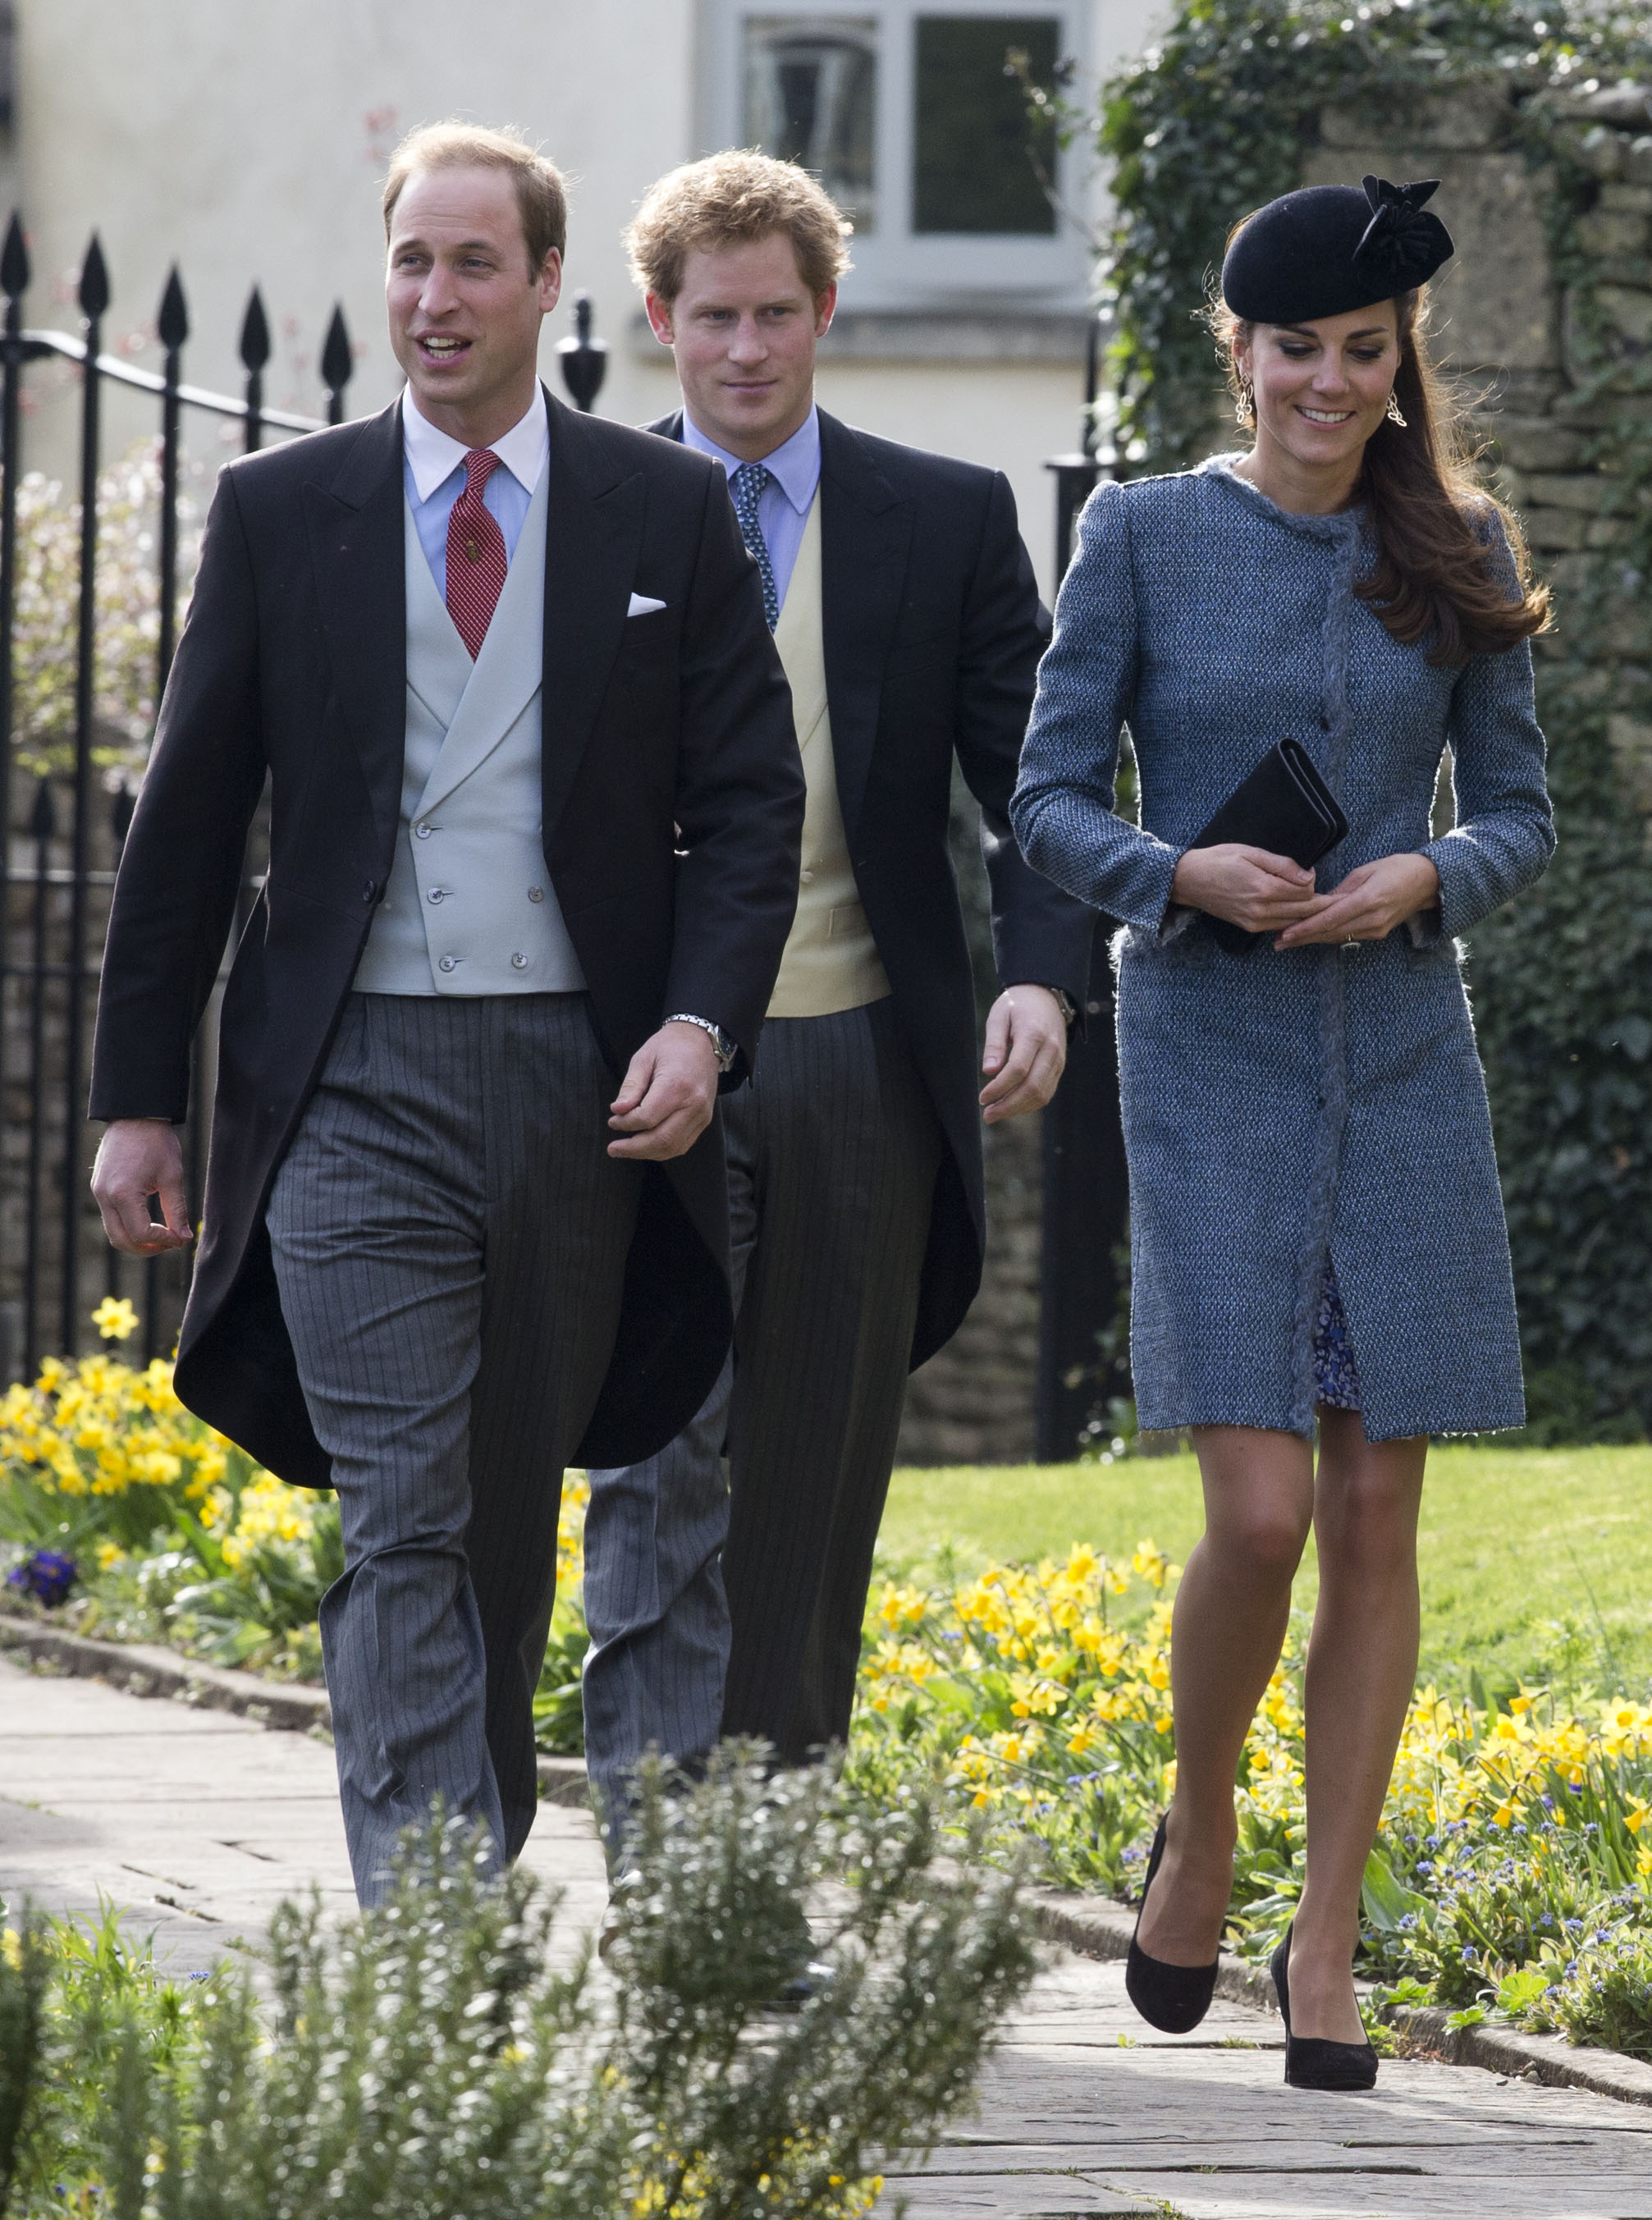 The Duke and Duchess of Cambridge and Prince Harry attend the wedding of close friends, Lucy Meade and Charlie Budgett at St Mary's Church, Marshfield, Gloucestershire.